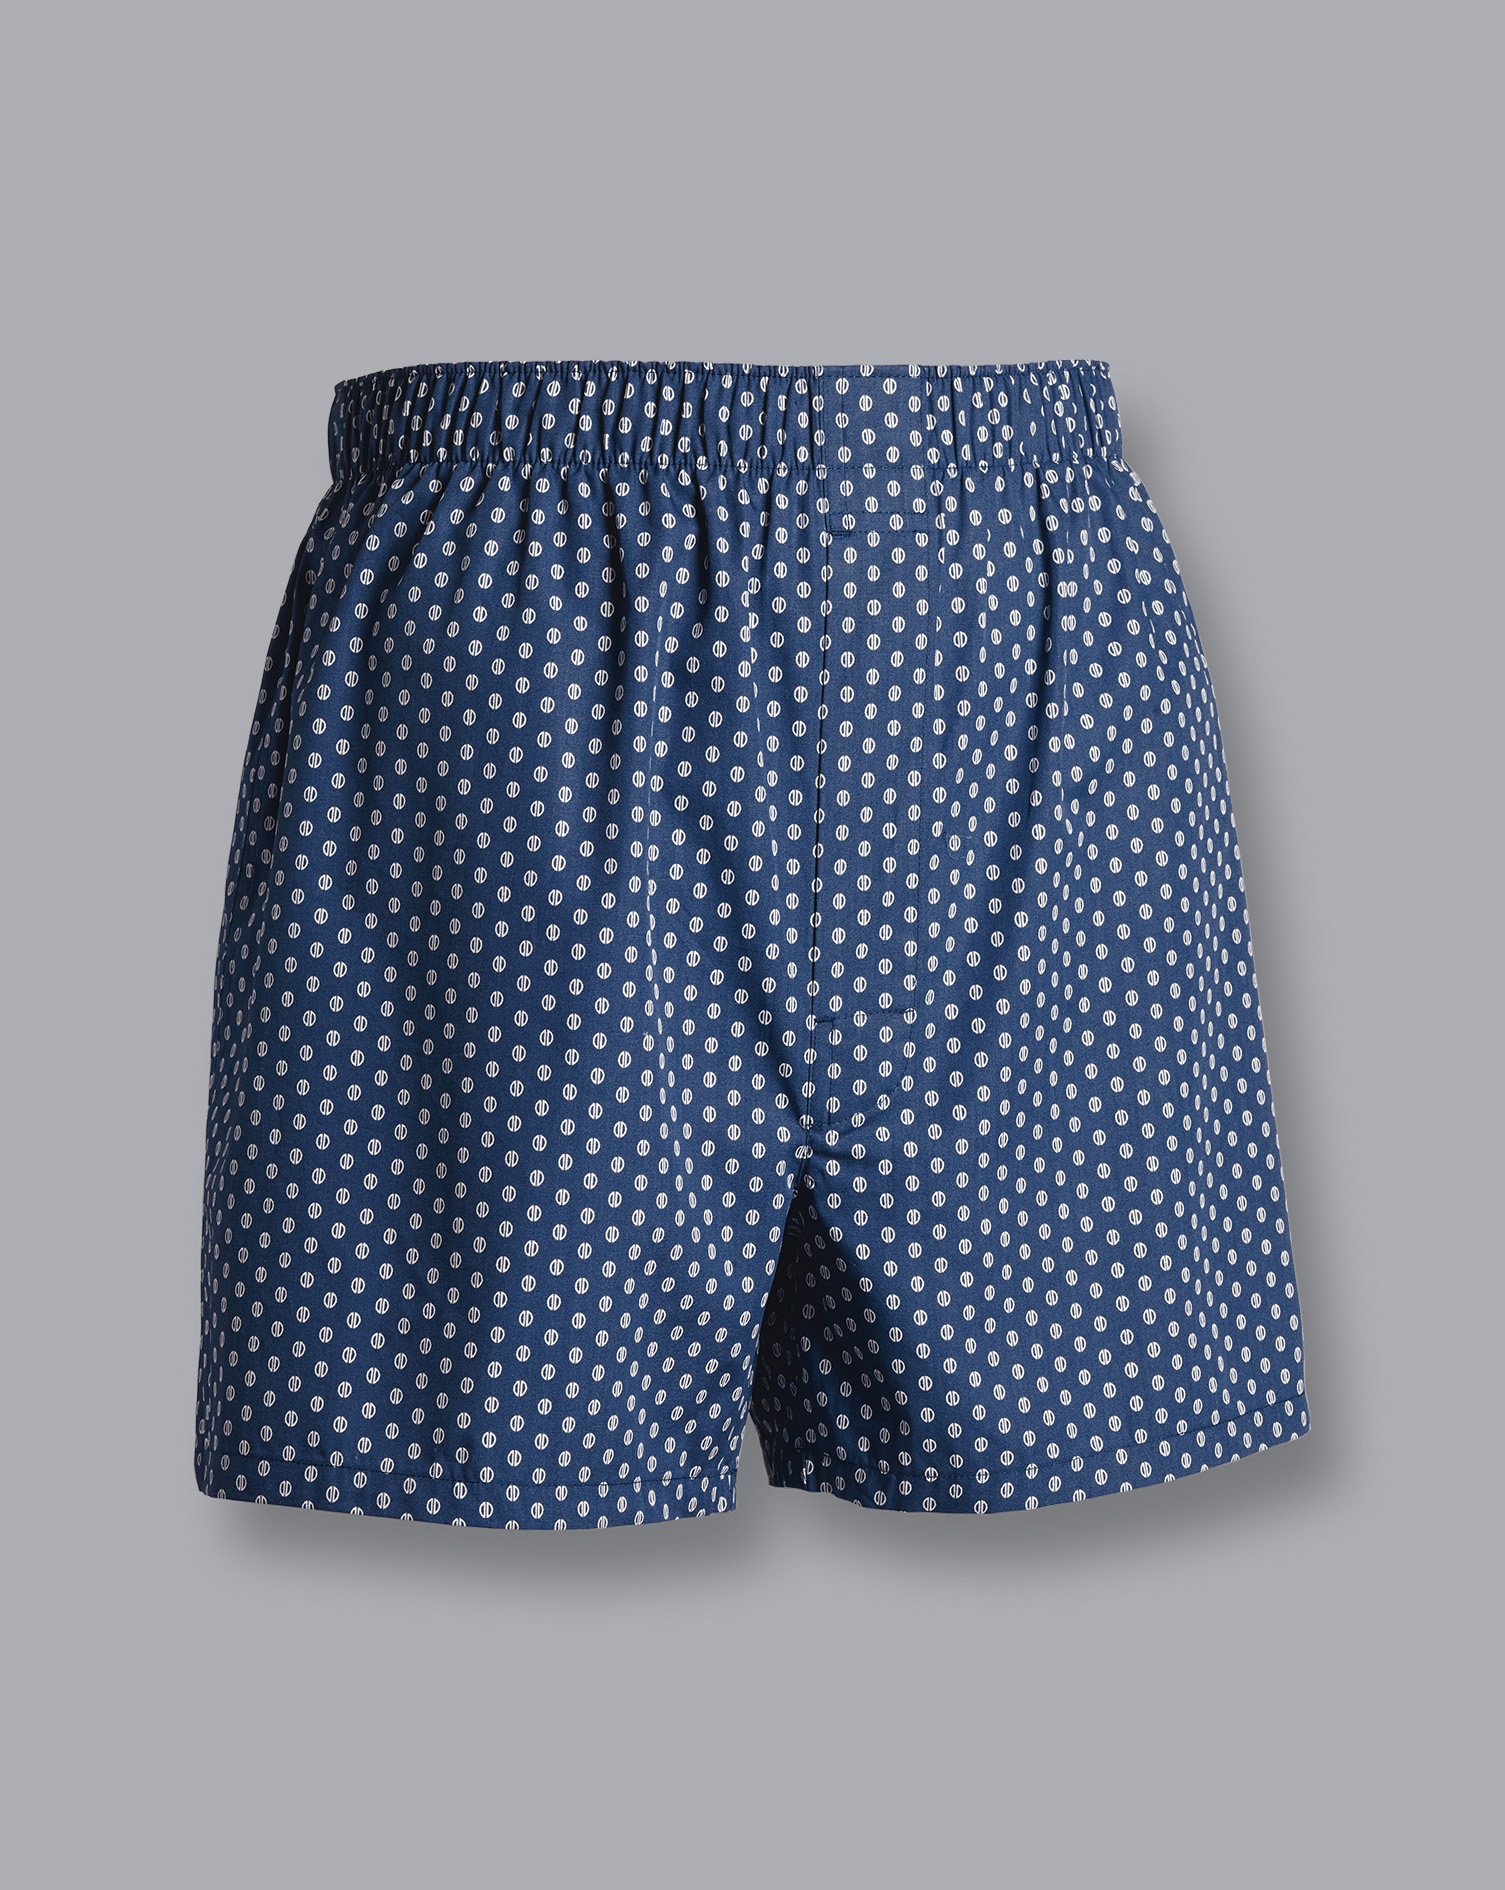 Men's Charles Tyrwhitt England Rugby Ball Motif Woven Boxers - Petrol Blue Size Large Cotton
